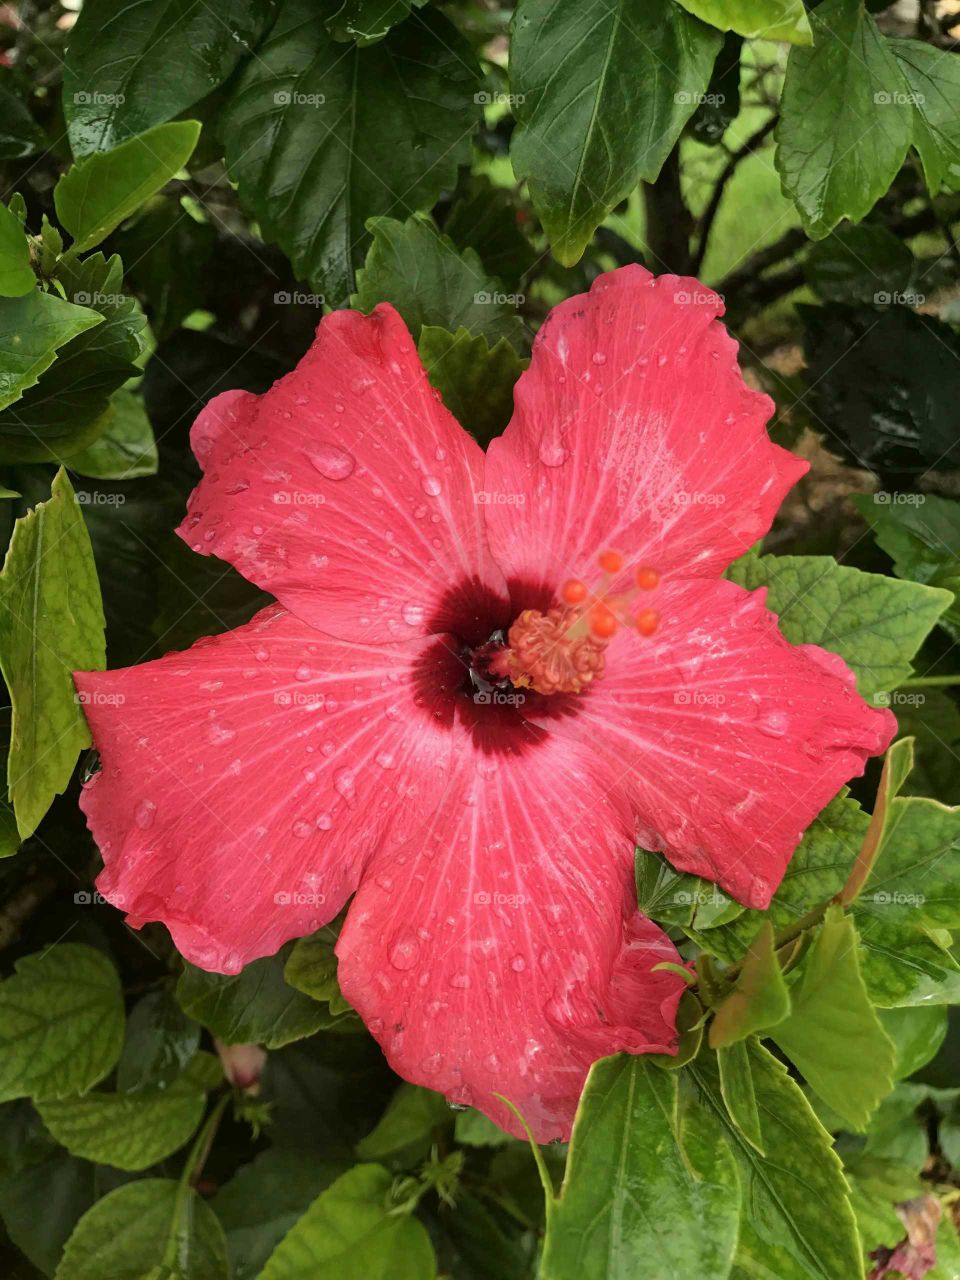 Beautiful vibrant pink flower outside my beach house in Central Florida. Still has some water from the rain that day. Flower is in full bloom here as the edges are beginning to wither back in a bit. Anyone know what type of flower this is?